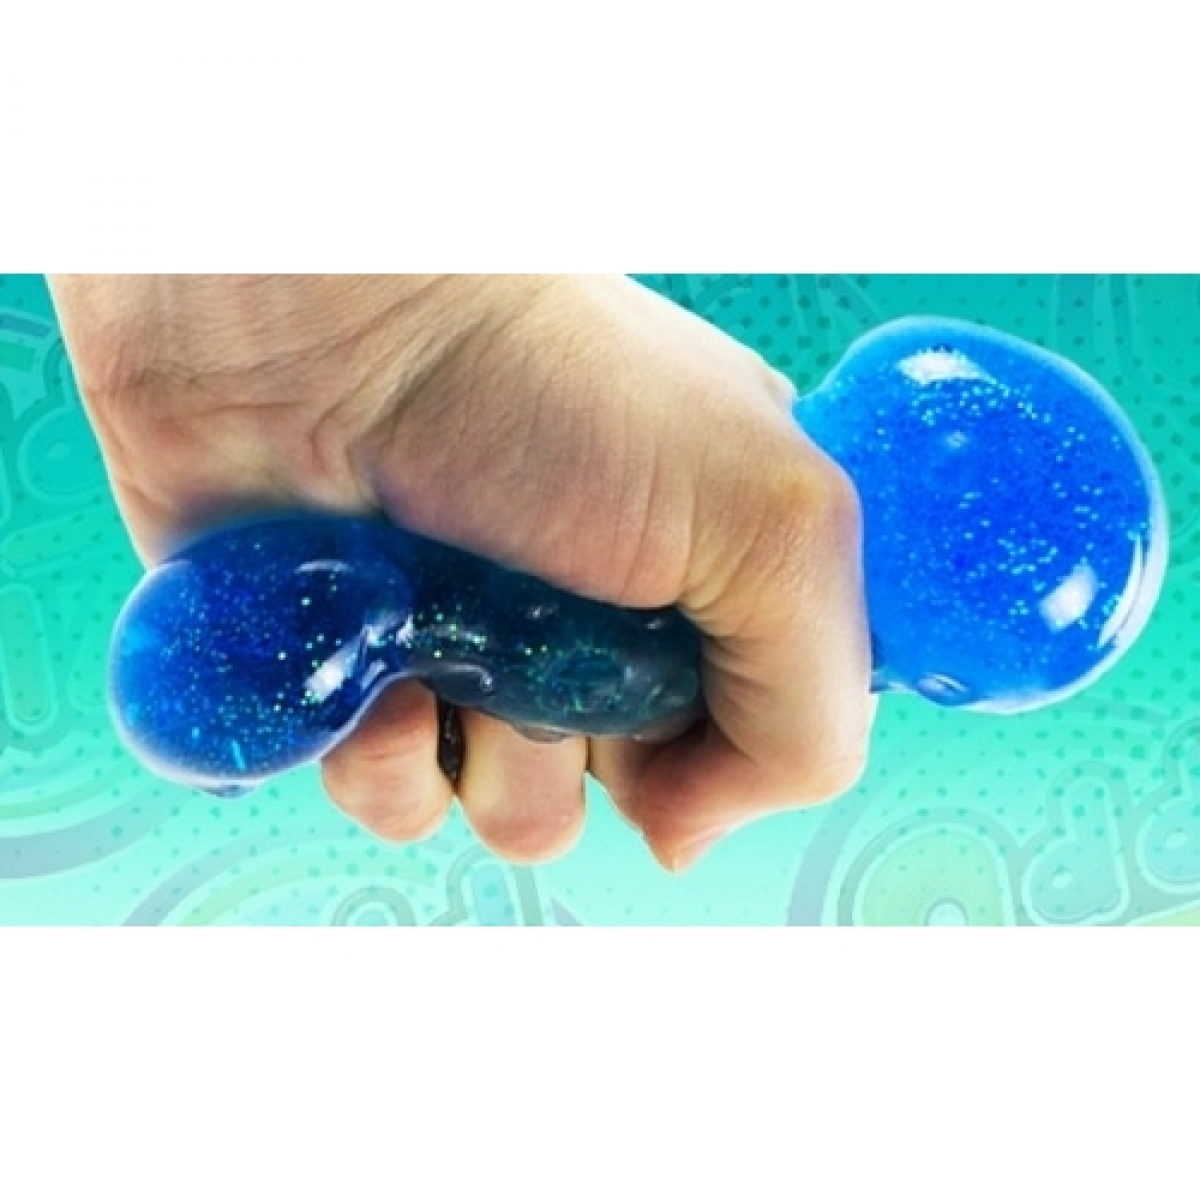 Details about   Squishy Sensory Stress Reliever Ball Toy Autism Squeeze Anxiety Fidget Relief aB 